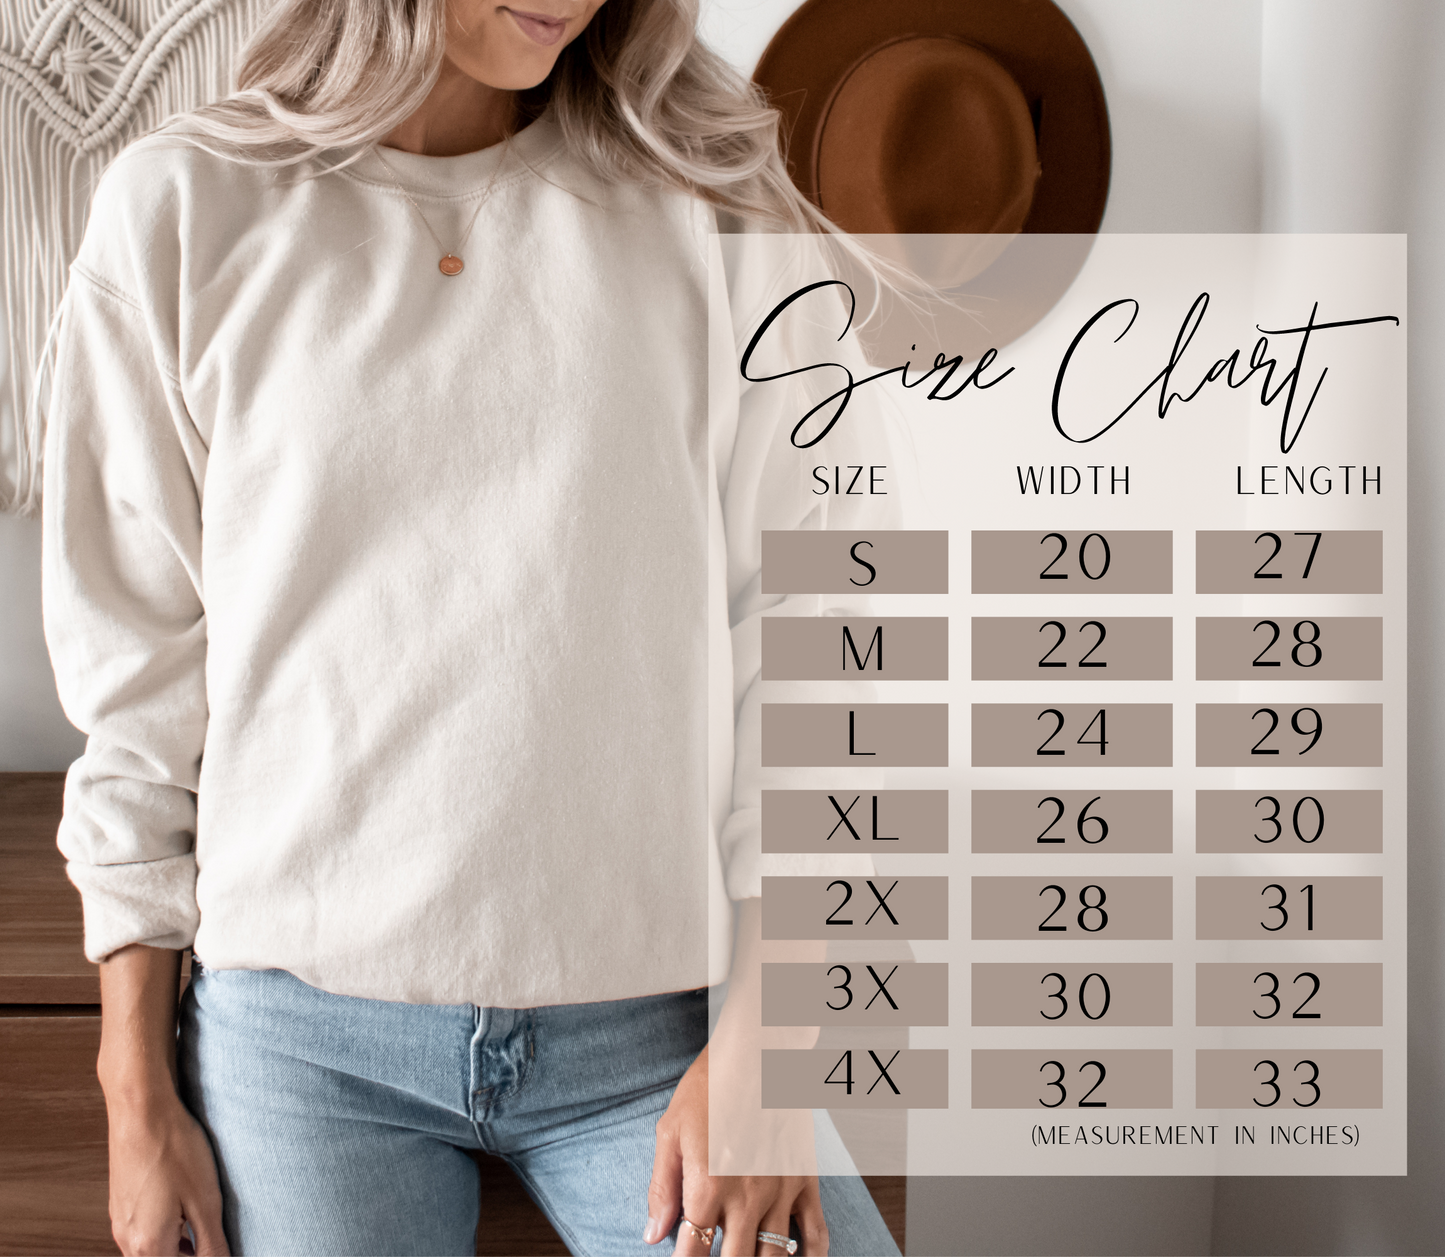 Give Thanks & Wear Your Spanx Sweater